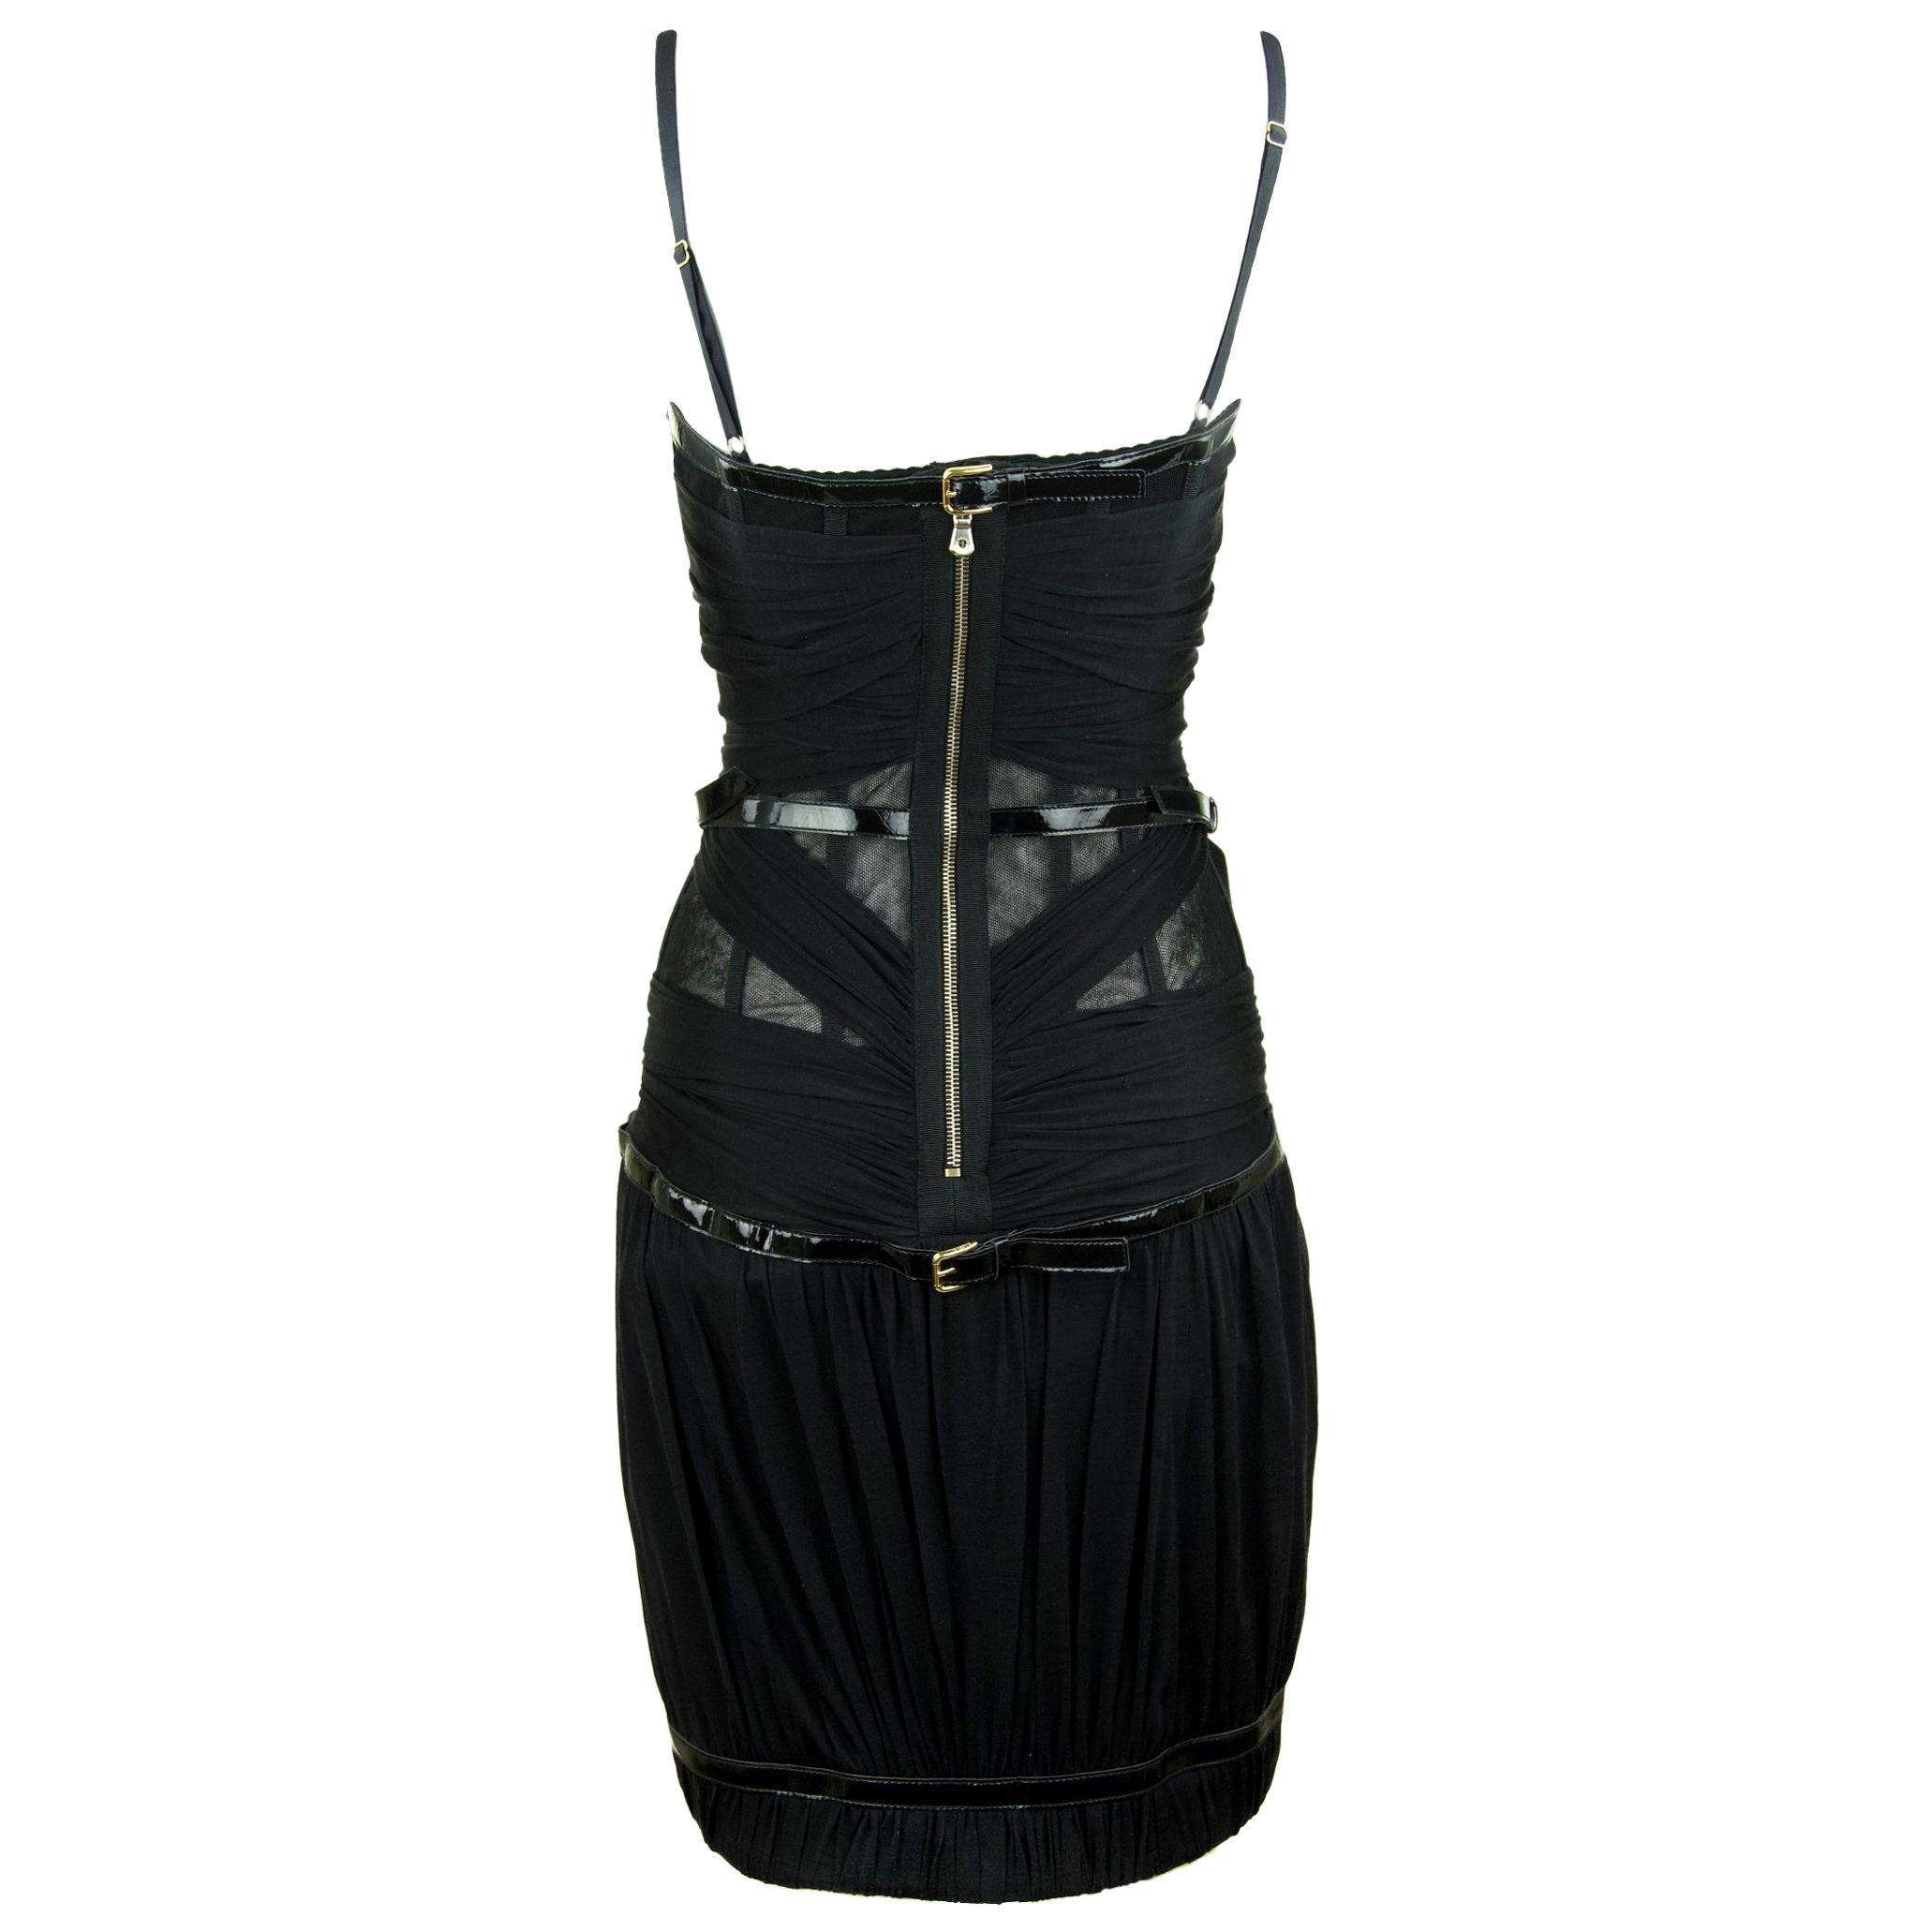 Dolce & Gabbana Black Bondage Corseted Bodycon Mini Dress has a built in corset with exposed zipper detail, sheer tulle with featured patent leather belt details.  

Size: IT 42

Care; Dry clean only

Made in Italy